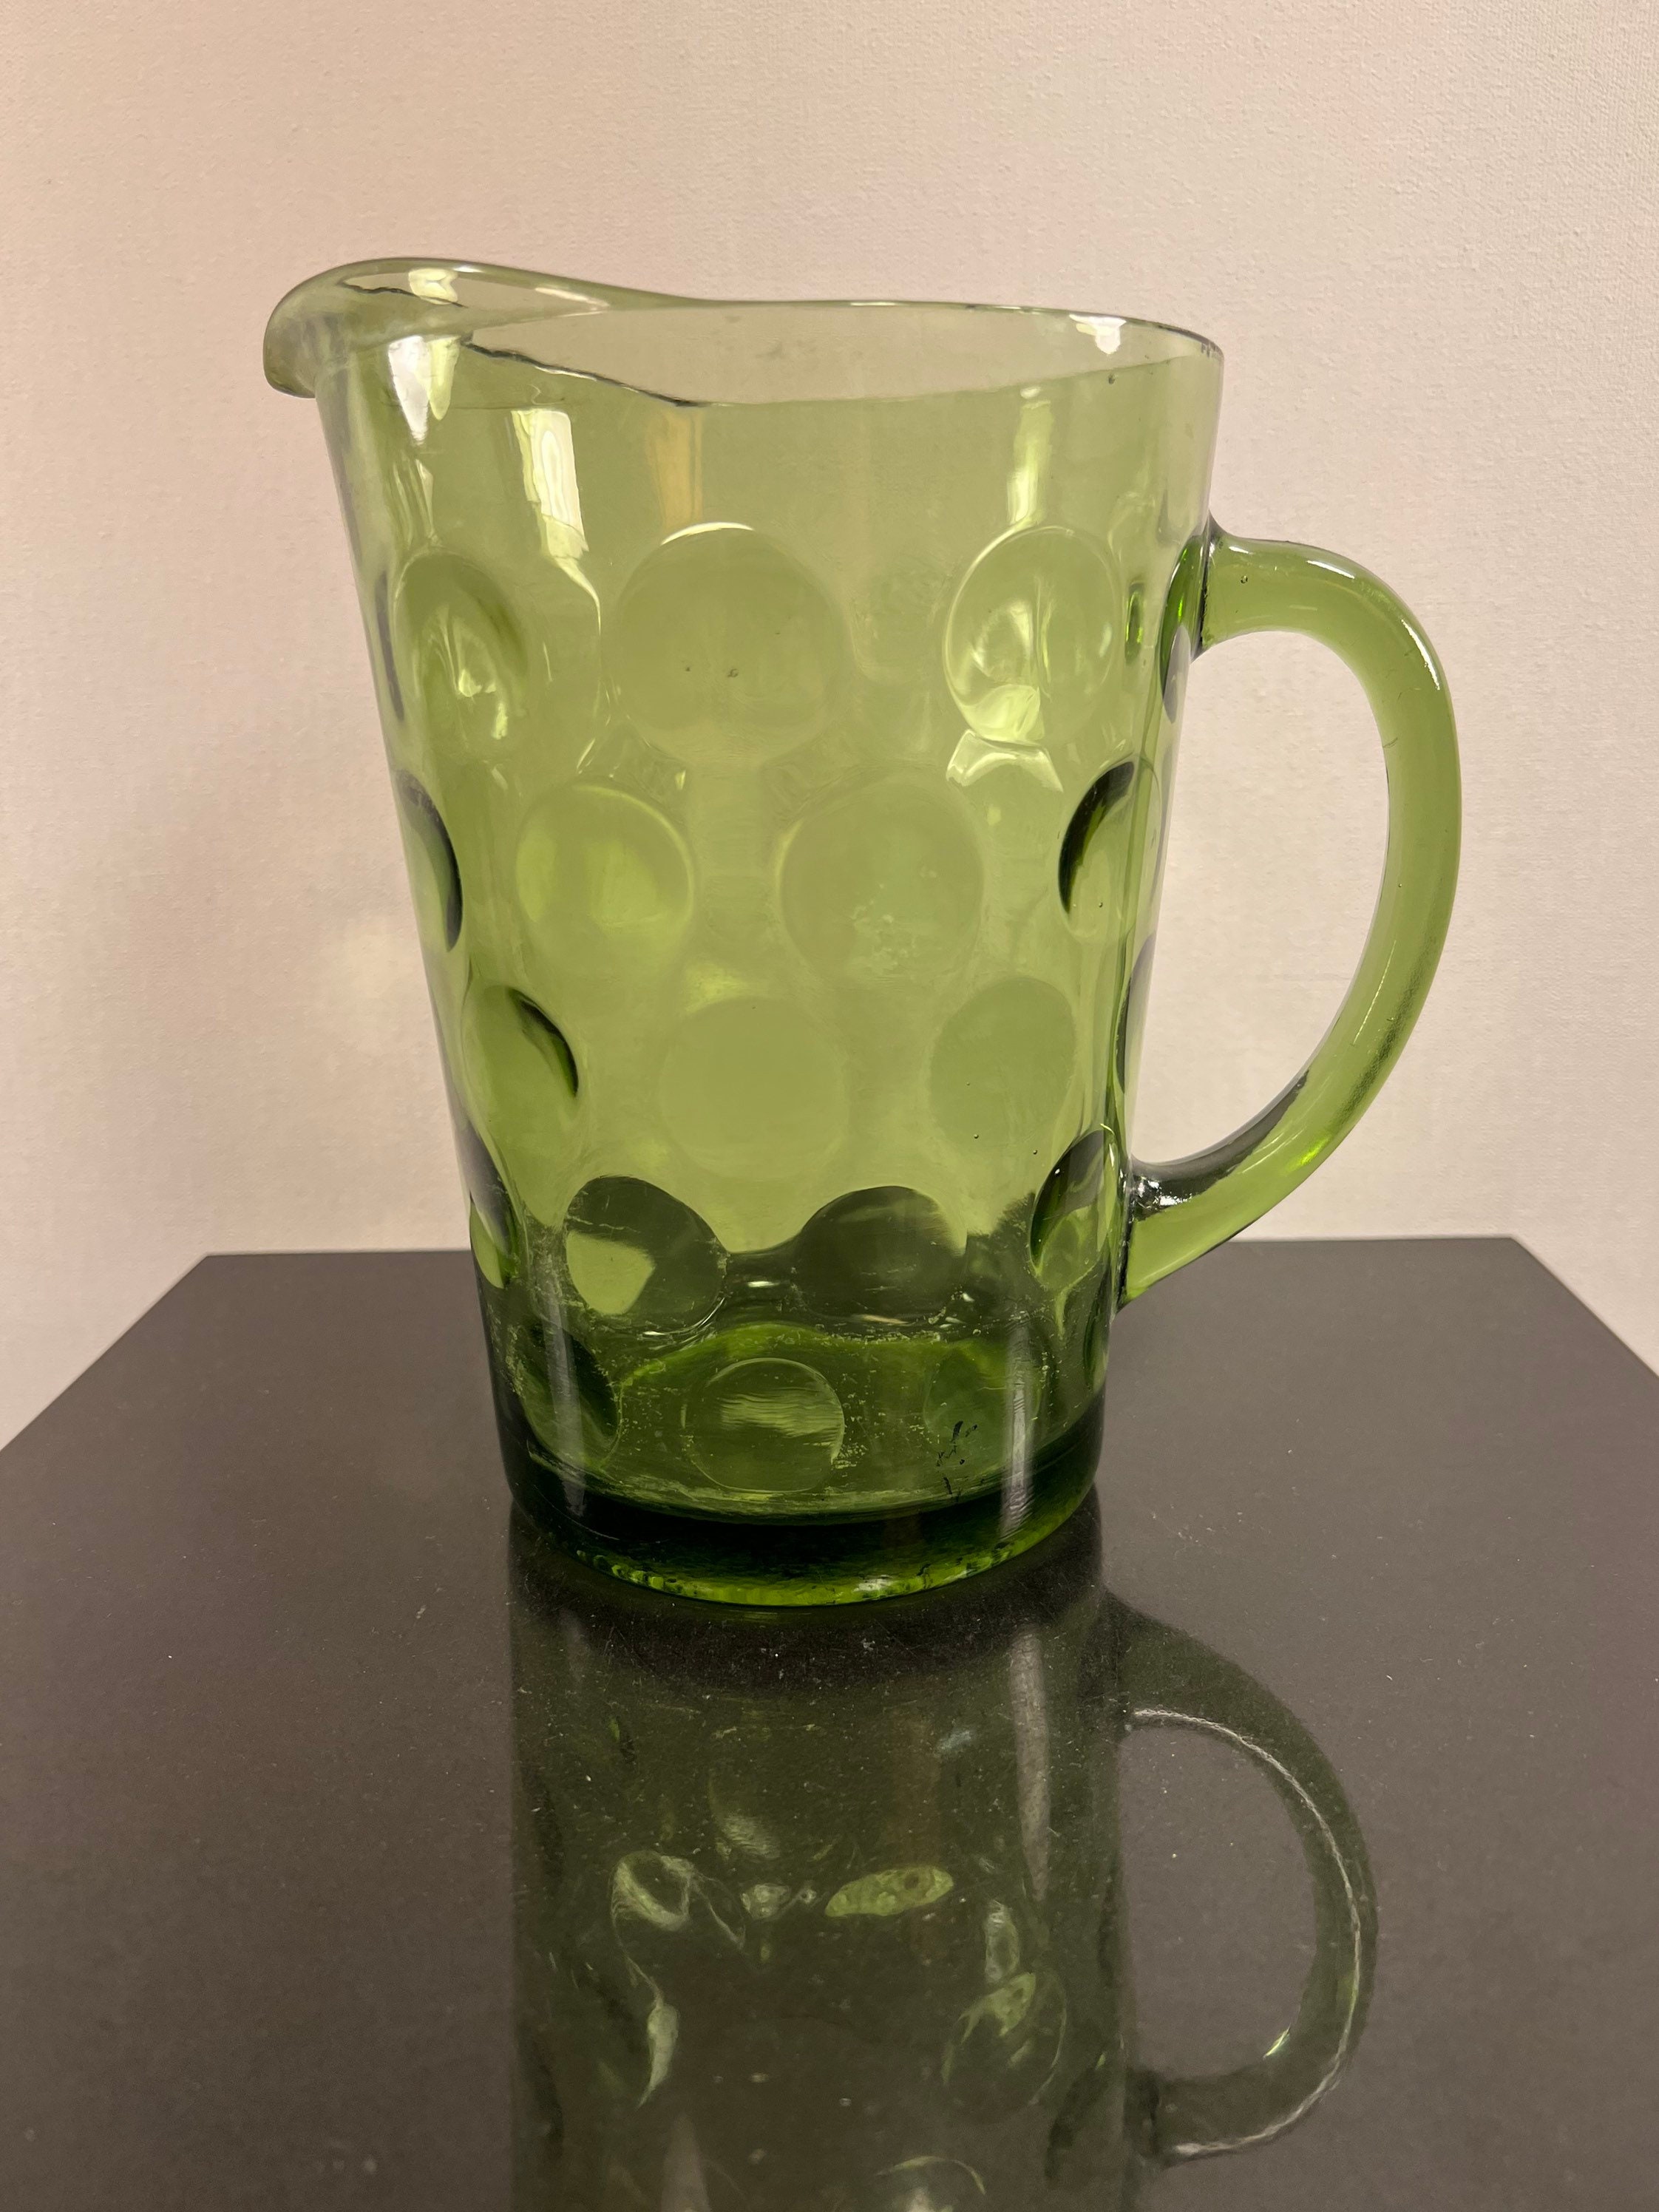 Pitcher With Green Juice 3D, Incl. pitcher & glass - Envato Elements